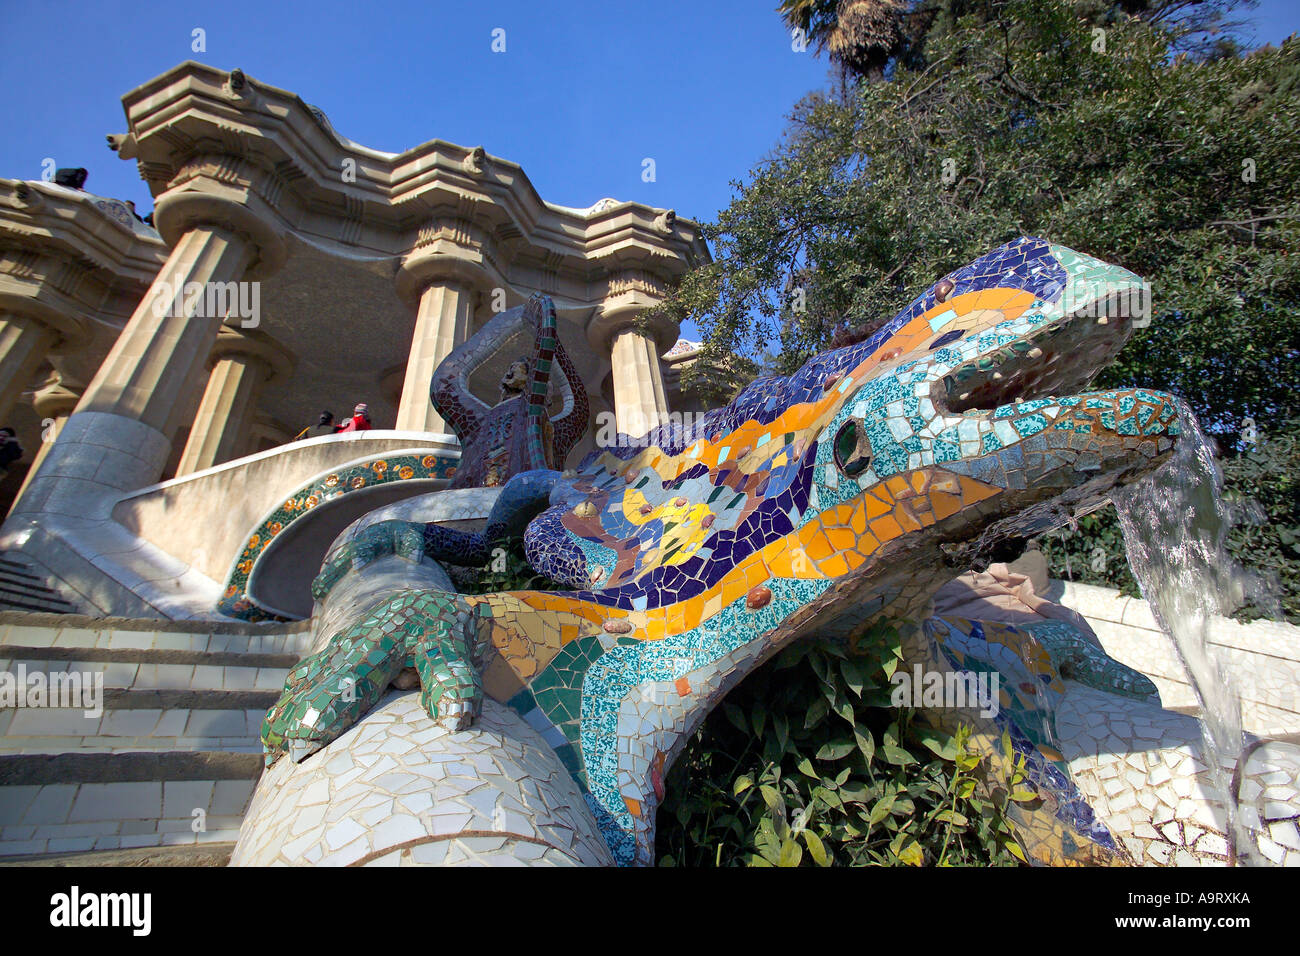 Gaudí's multicolored mosaic dragon fountain in Park Guell prior to vandalism early in 2007. Stock Photo